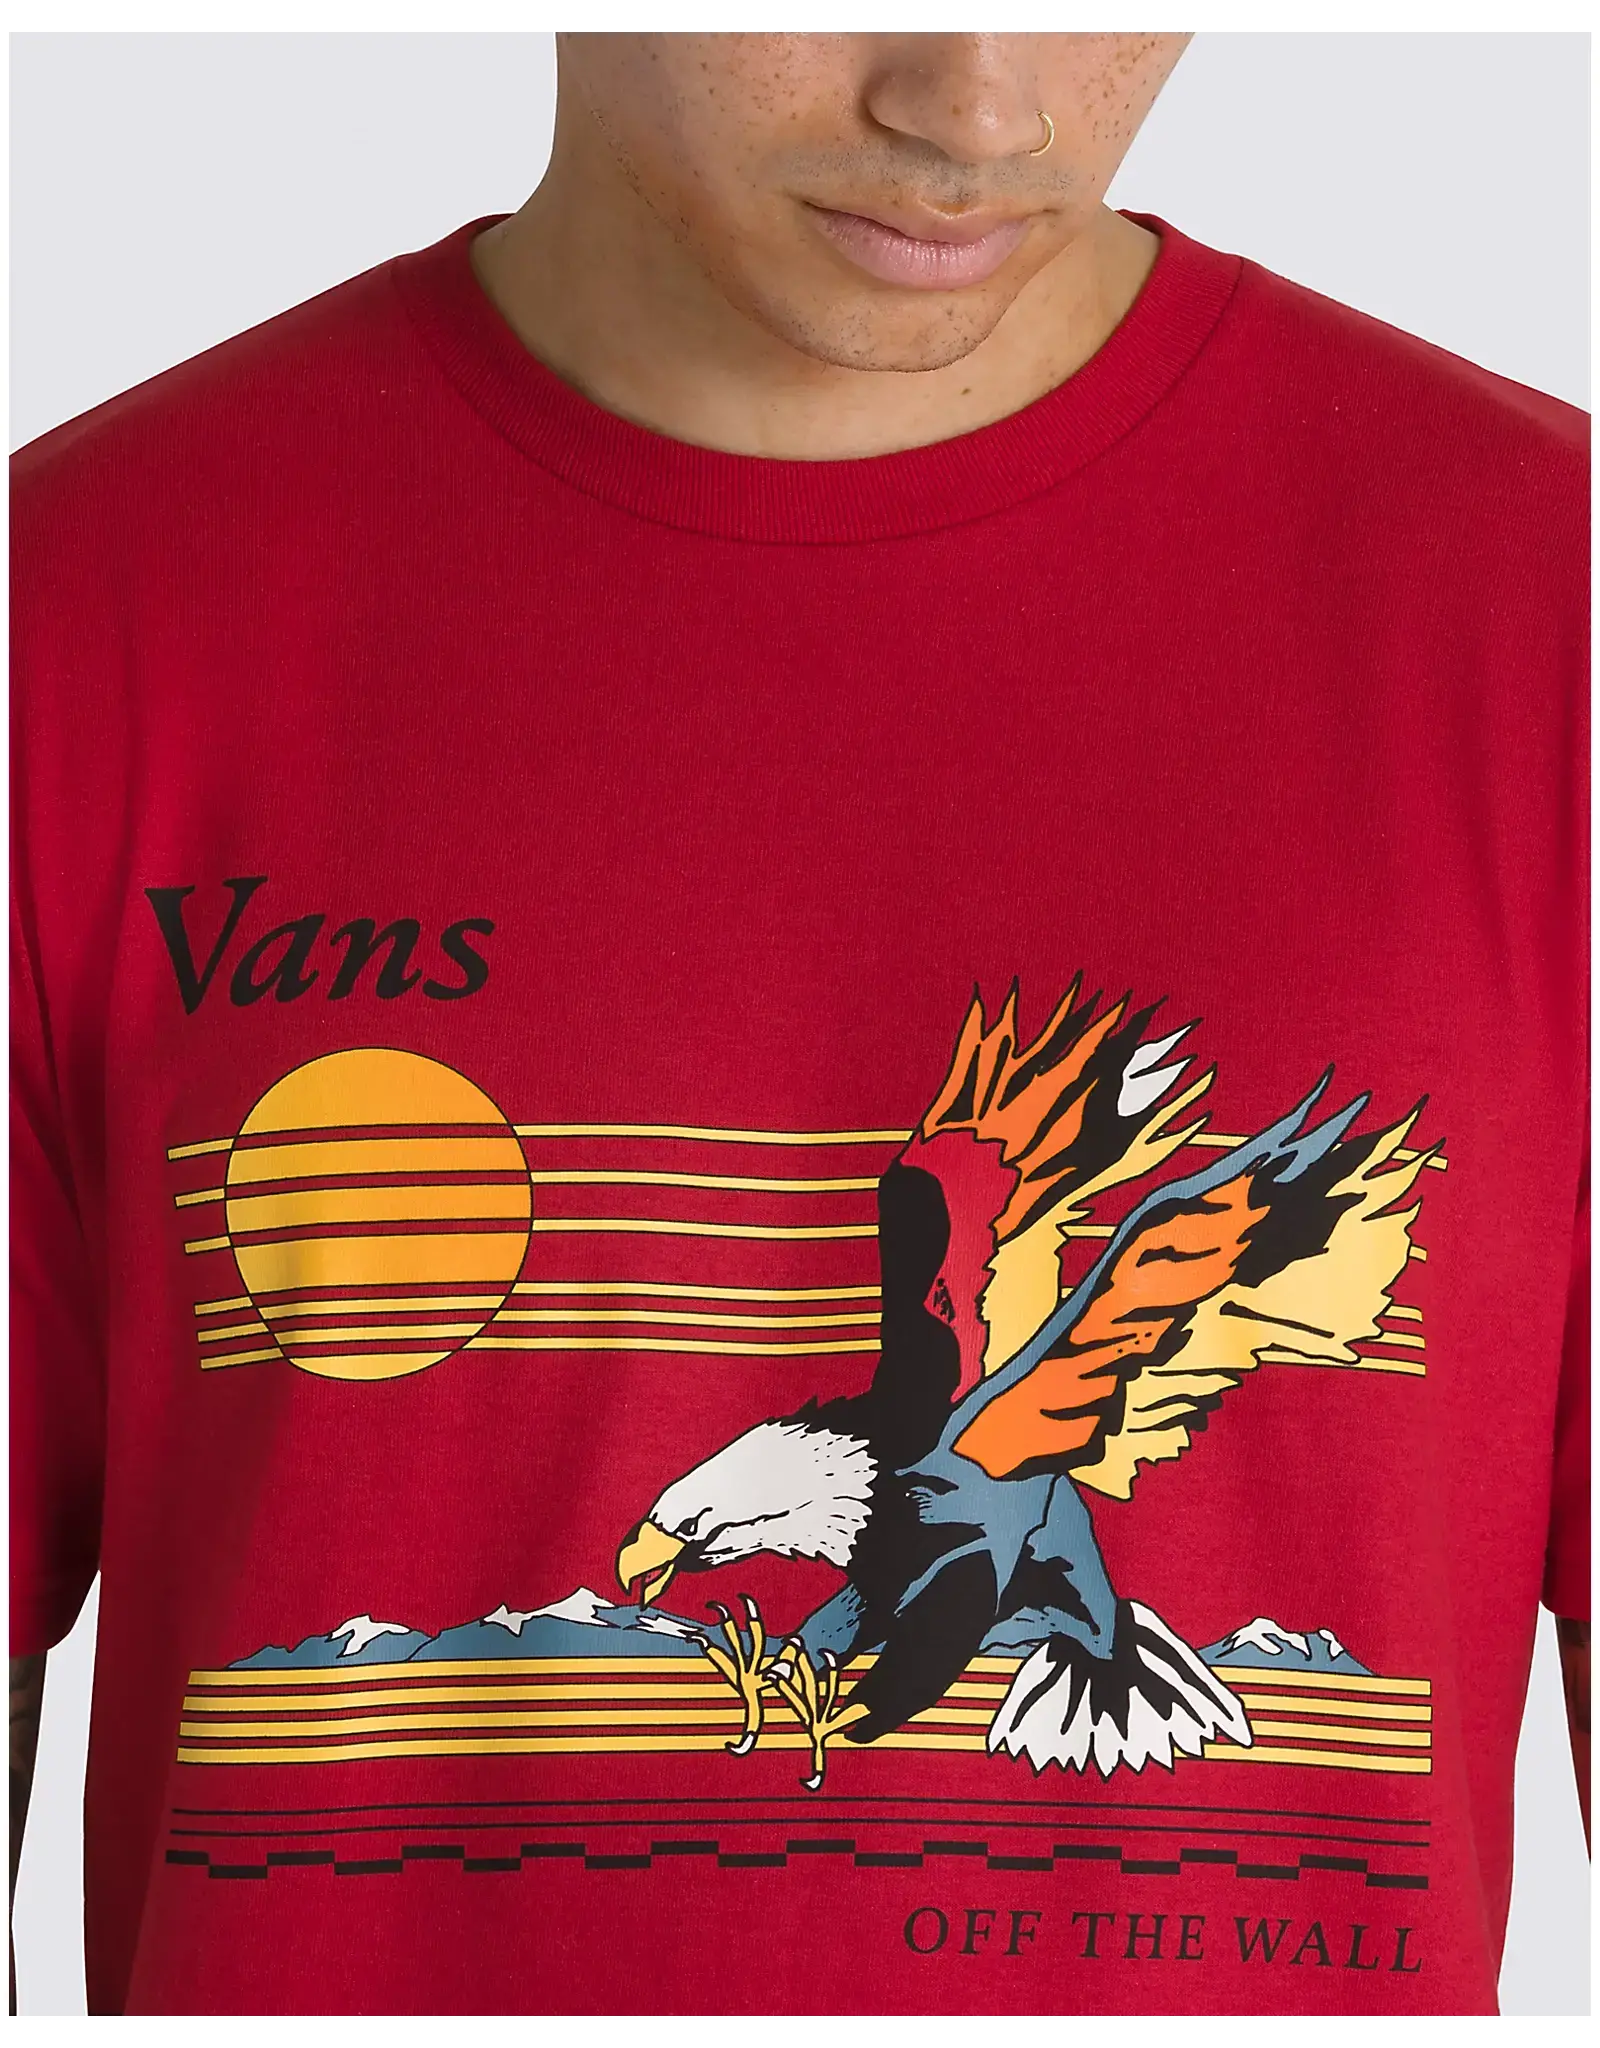 SOARING EAGLE SS TEE Chili Pepper - VN0008RR14A1